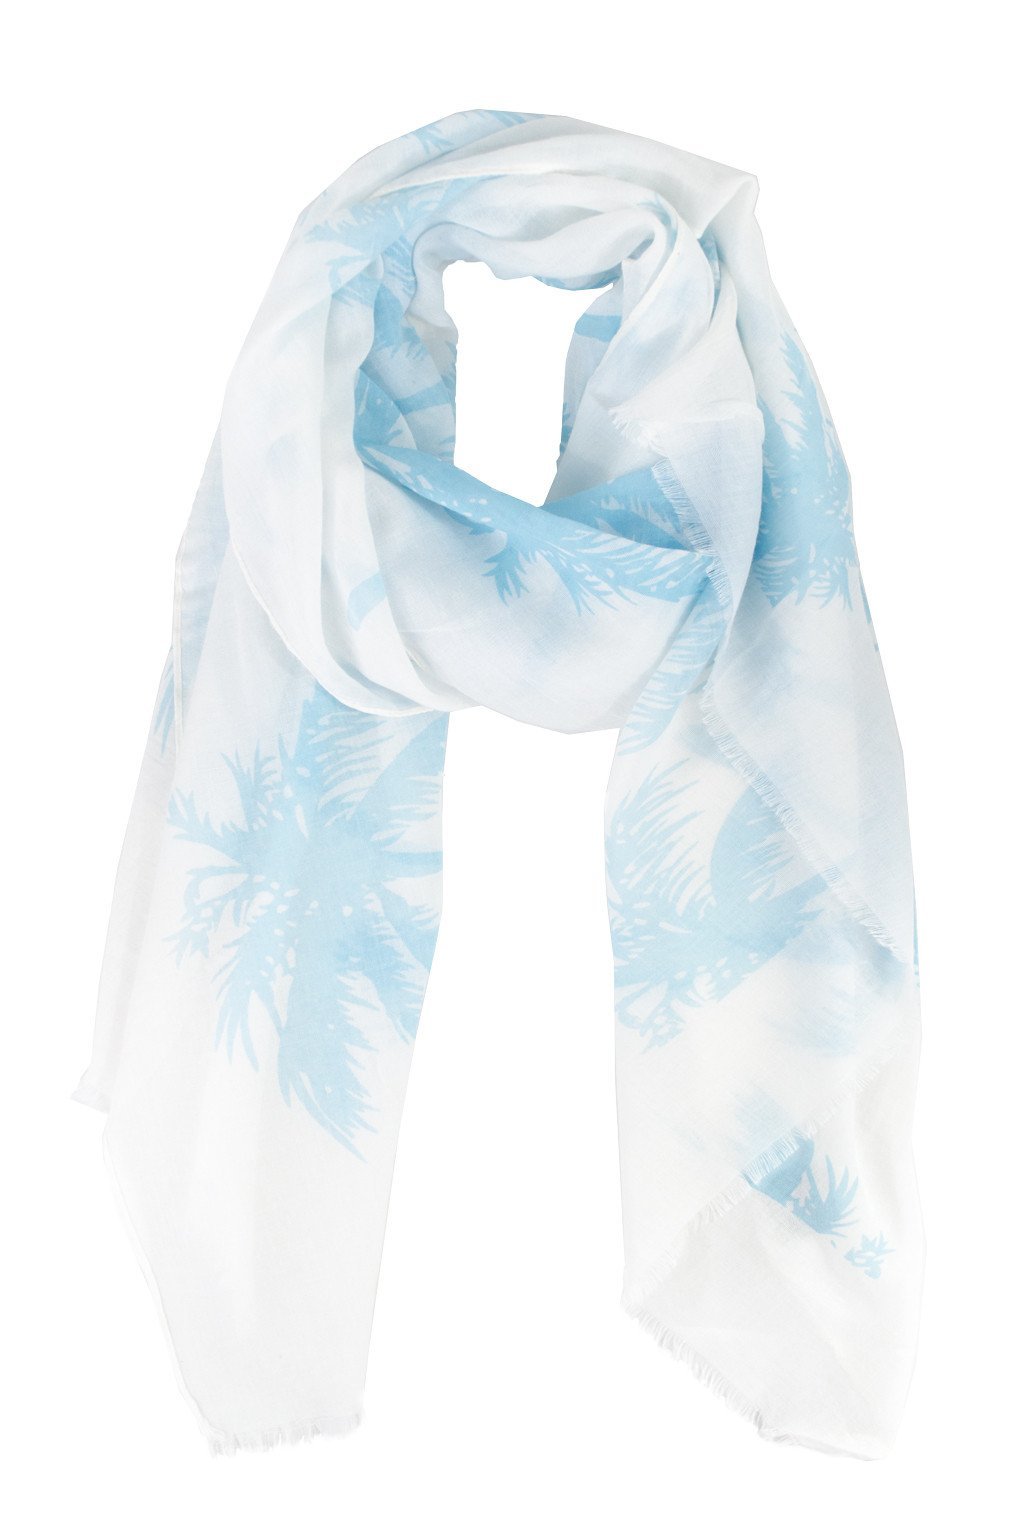 Palm Scarf - Two Penny Blue